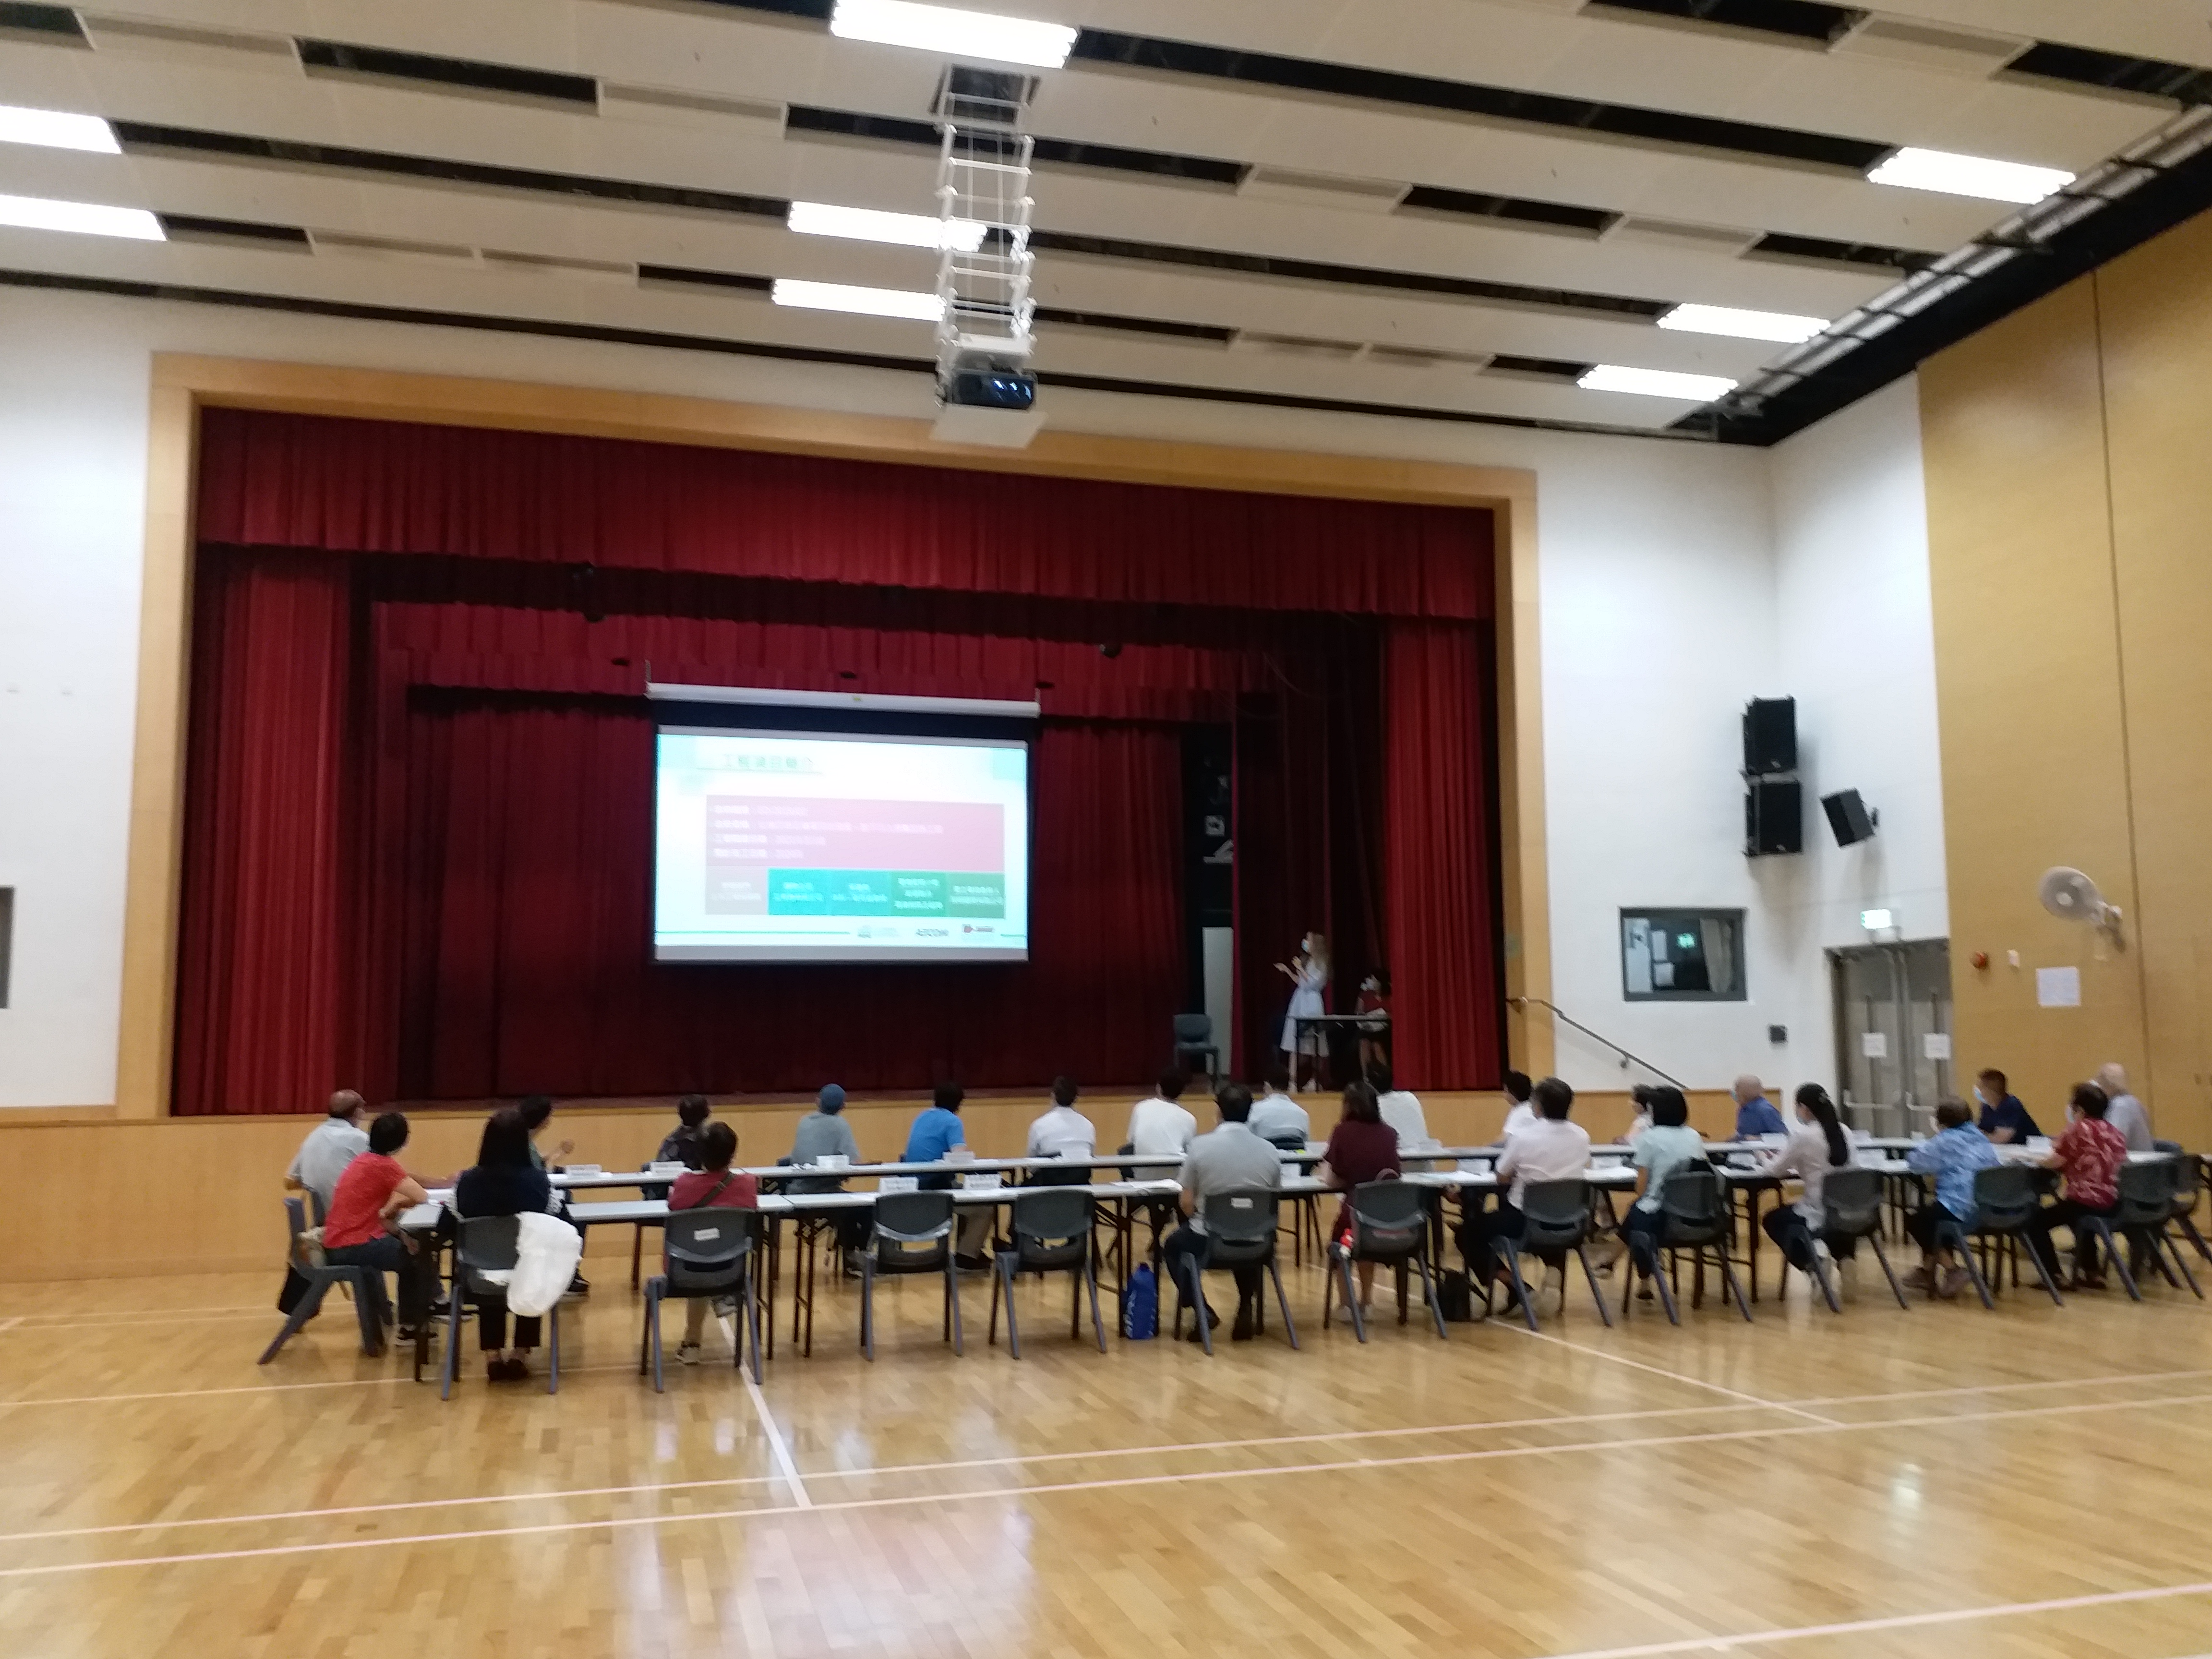 The engineering team attended a meeting with Kwun Tong District Council Members to discuss about the road improvement works and pedestrian connectivity facilities of Development of Anderson Road Quarry Site.